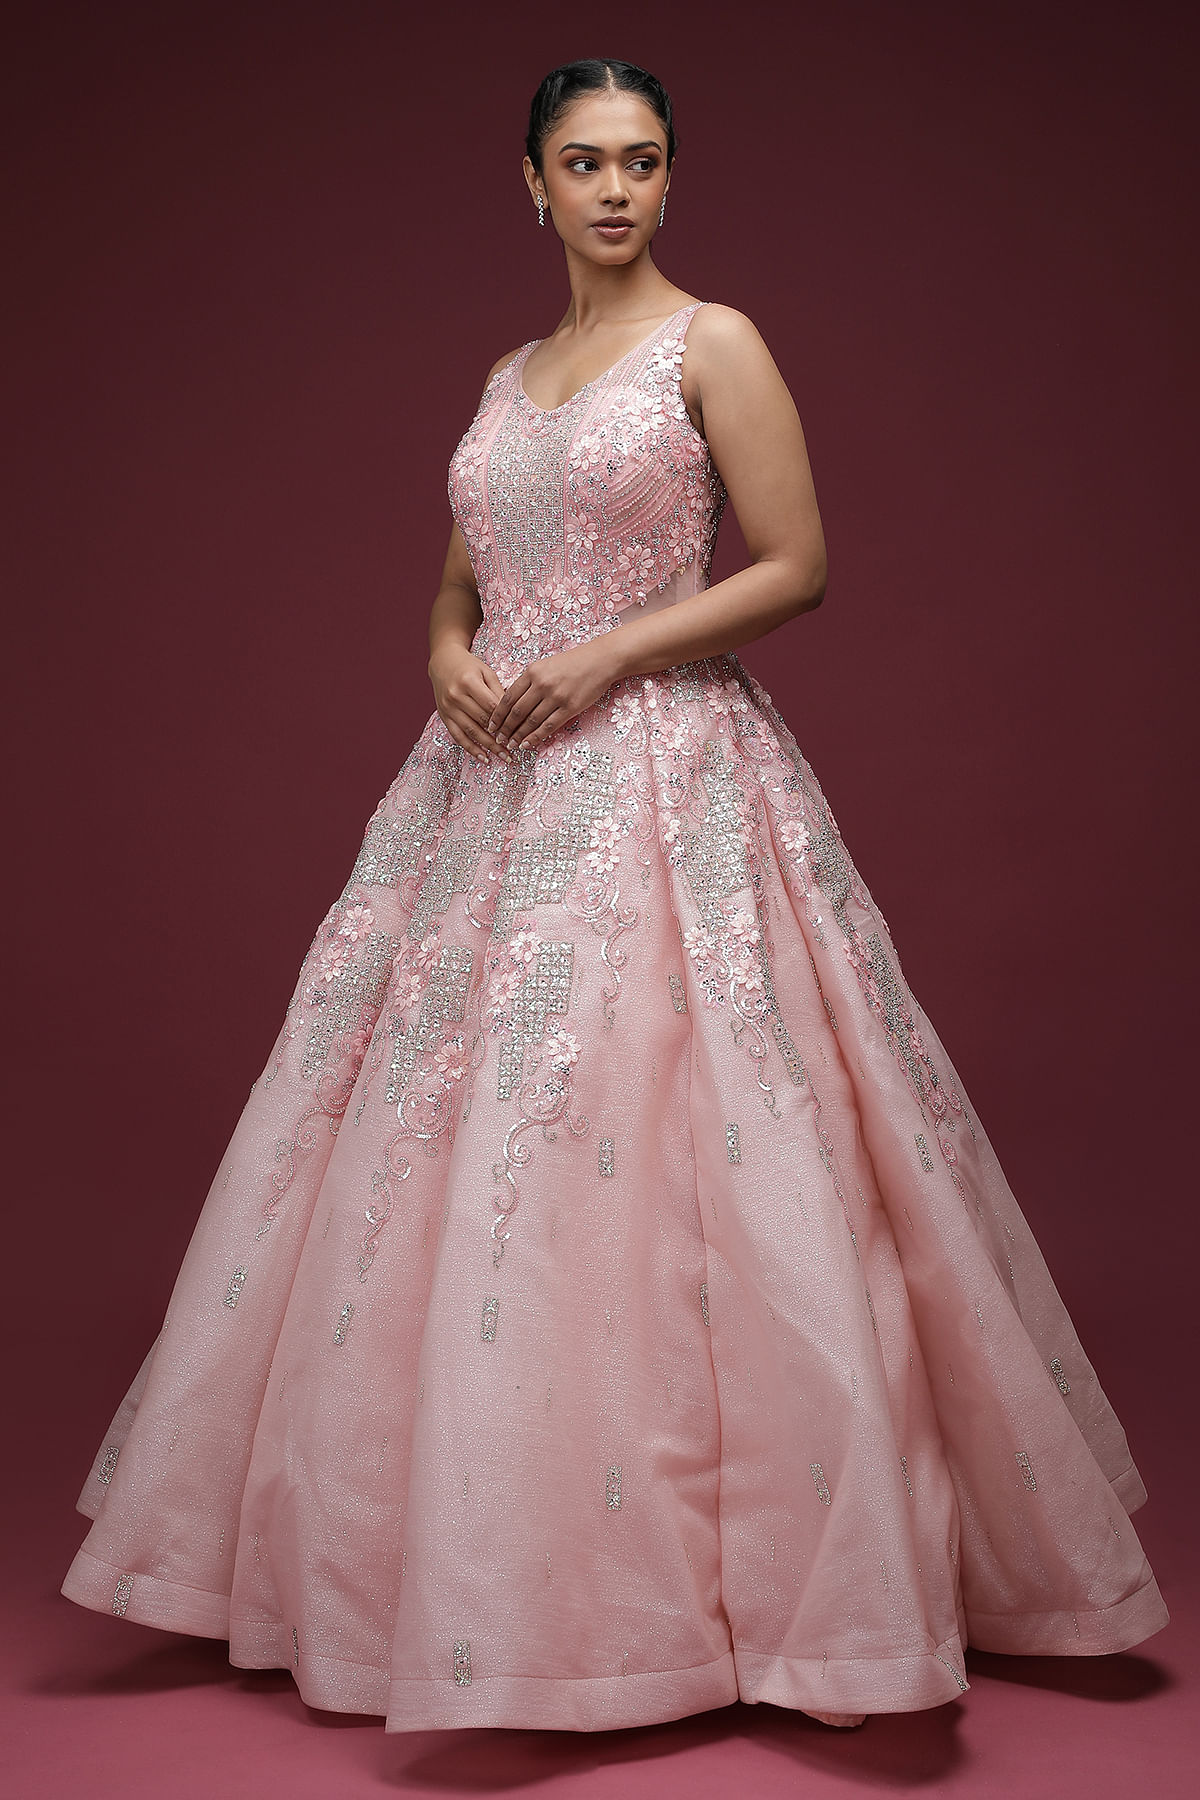 Elegant Evening Gowns for a Magical Reception